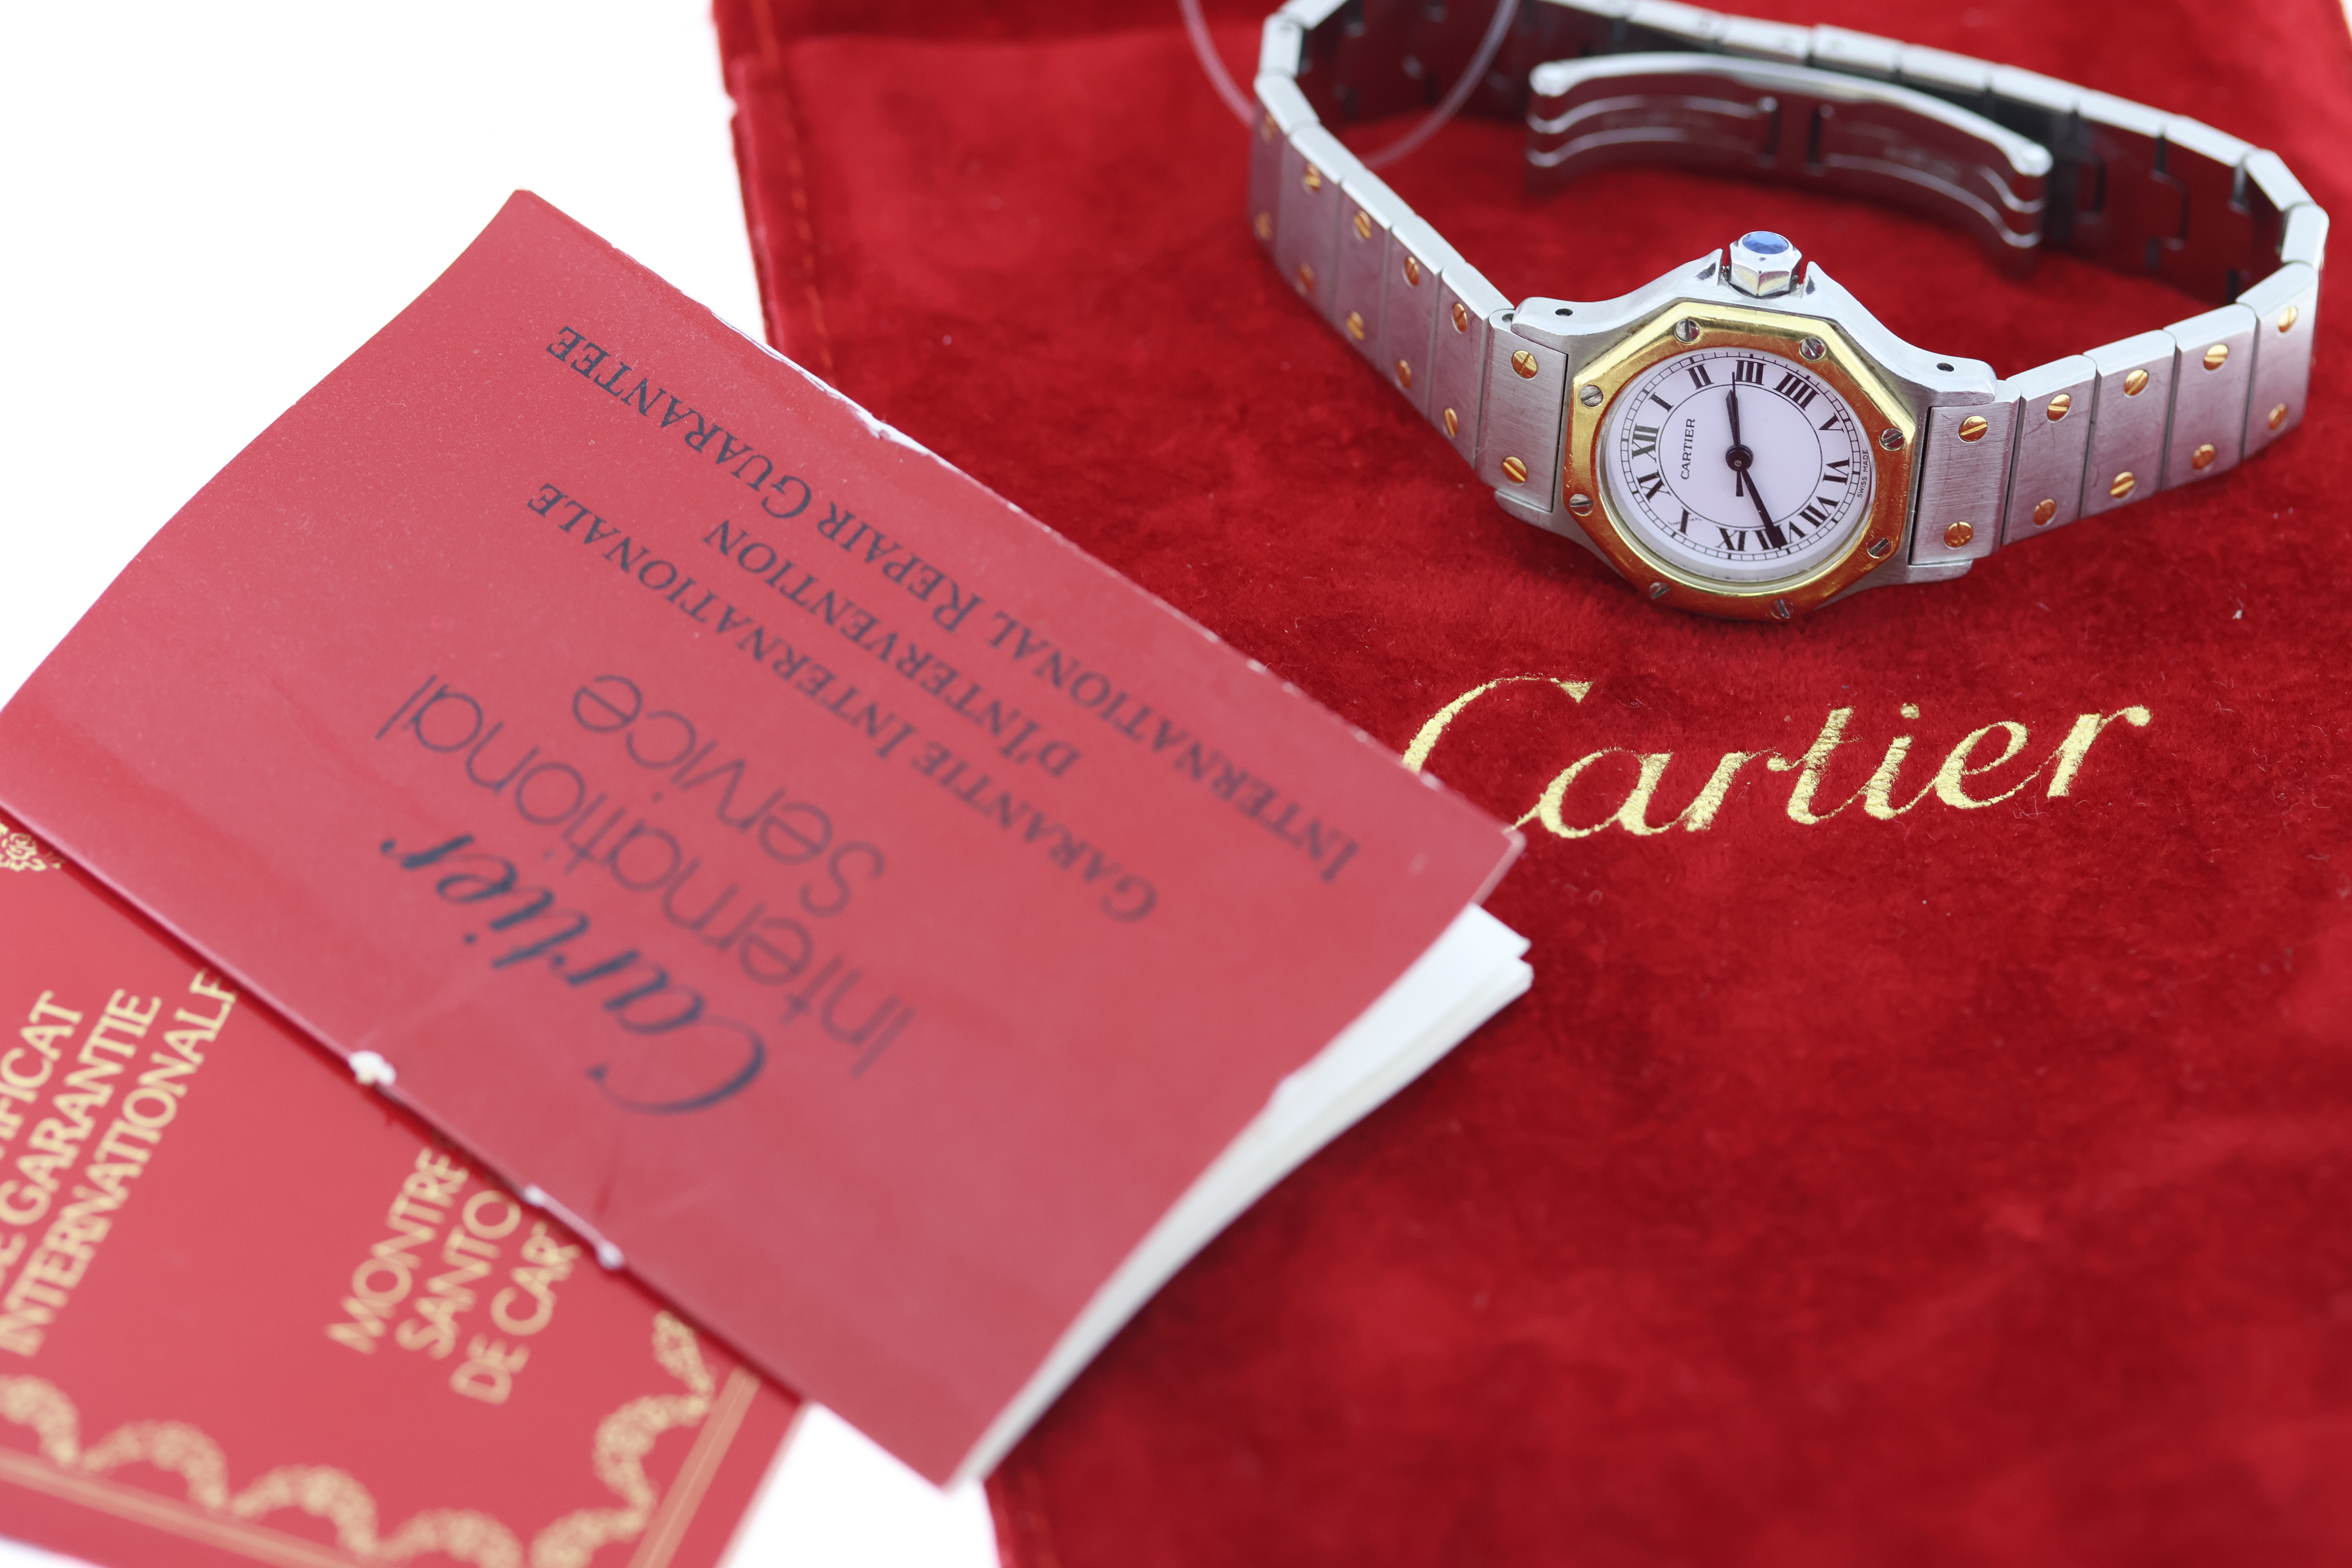 CARTIER SANTOS RONDE OCTOGON AUTOMATIC WITH PAPERS, white circular dial, gold octagonal bezel, - Image 2 of 7